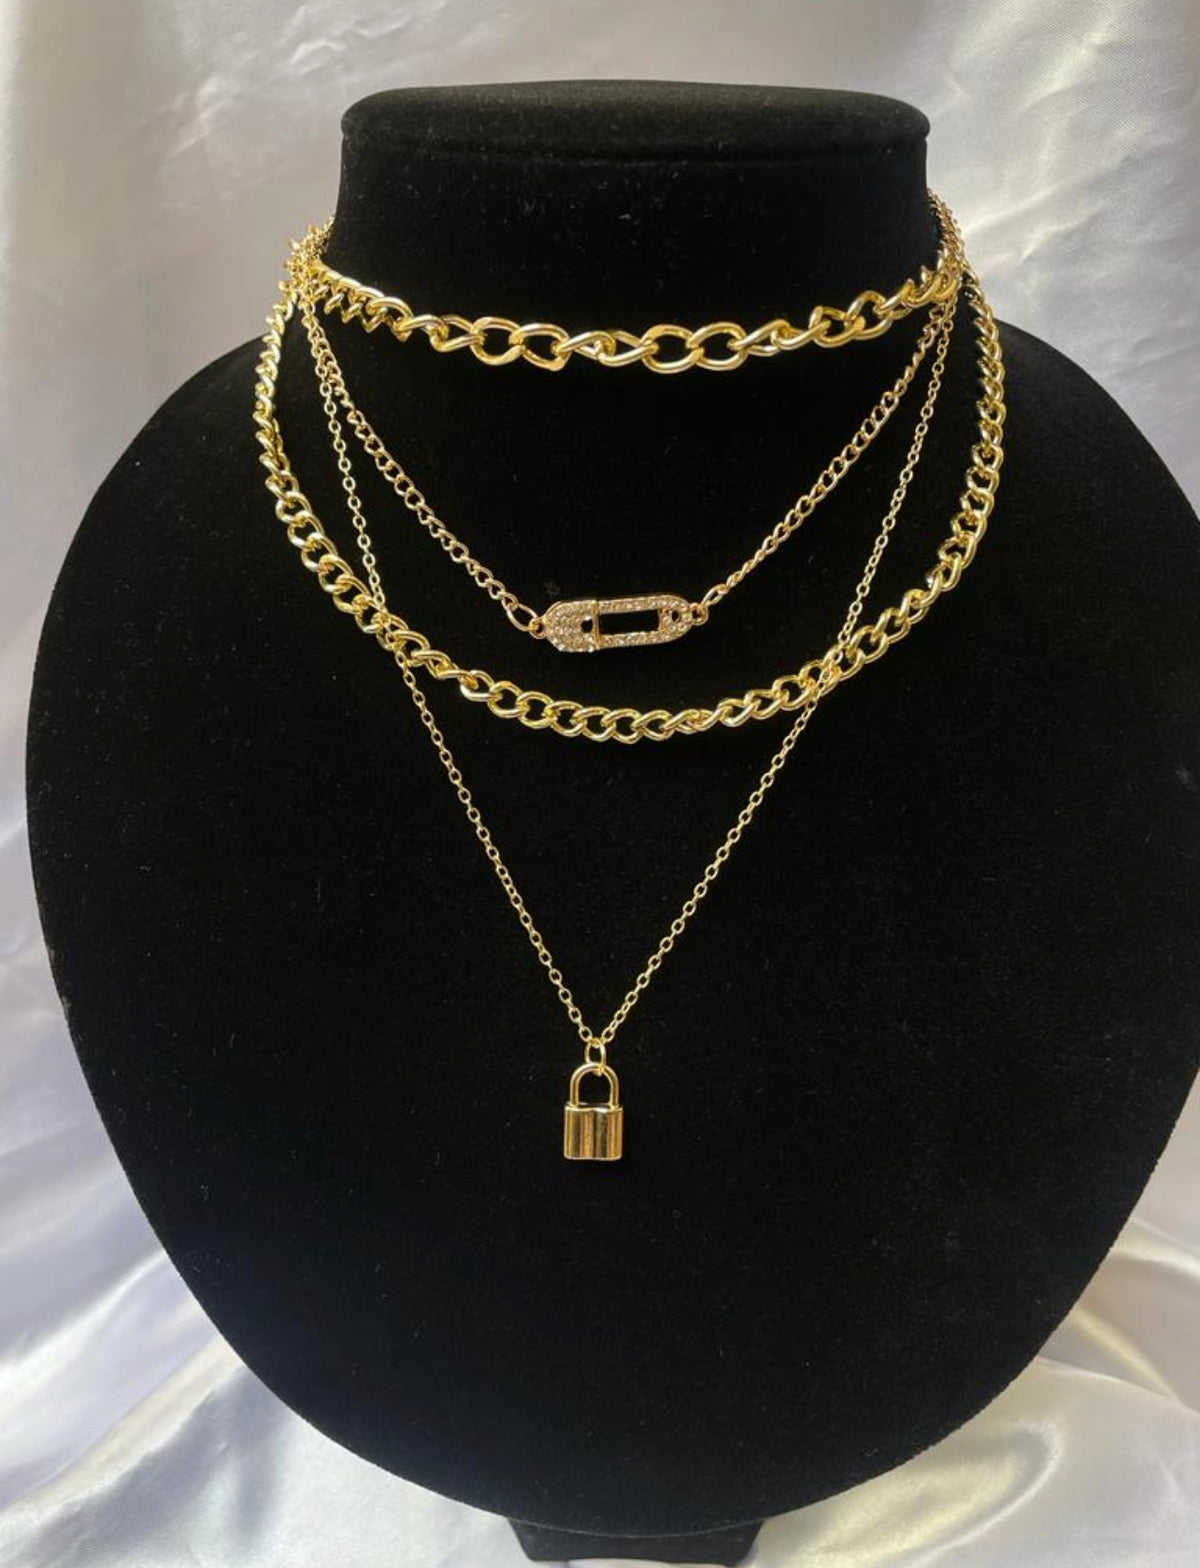 Ladies chains with shinny pin and padlock